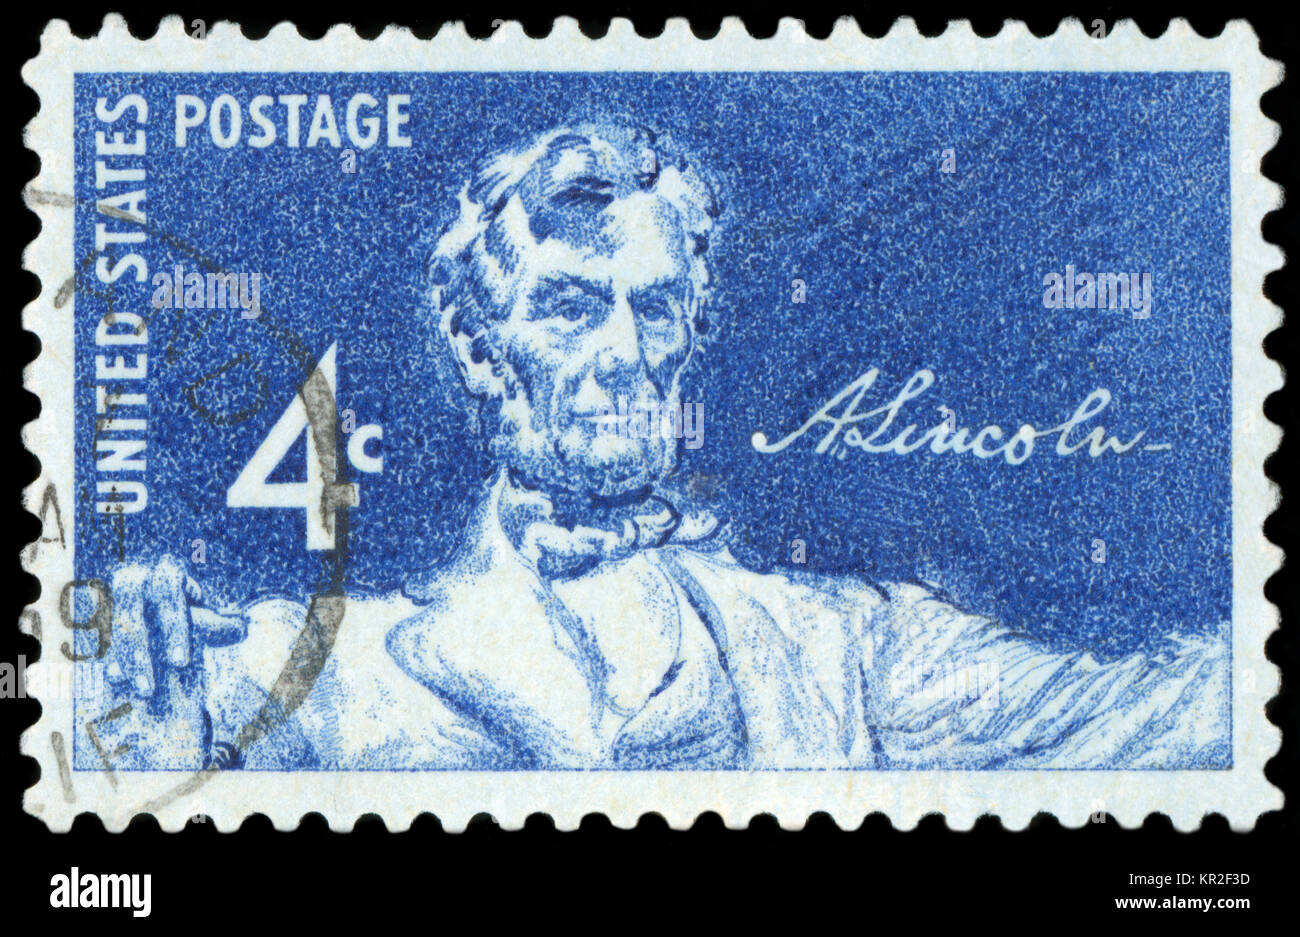 UNITED STATES, CIRCA 1958: A United States Postage Stamp depicting an image of Abraham Lincoln - the 16th President of the United States, circa 1958. Stock Photo